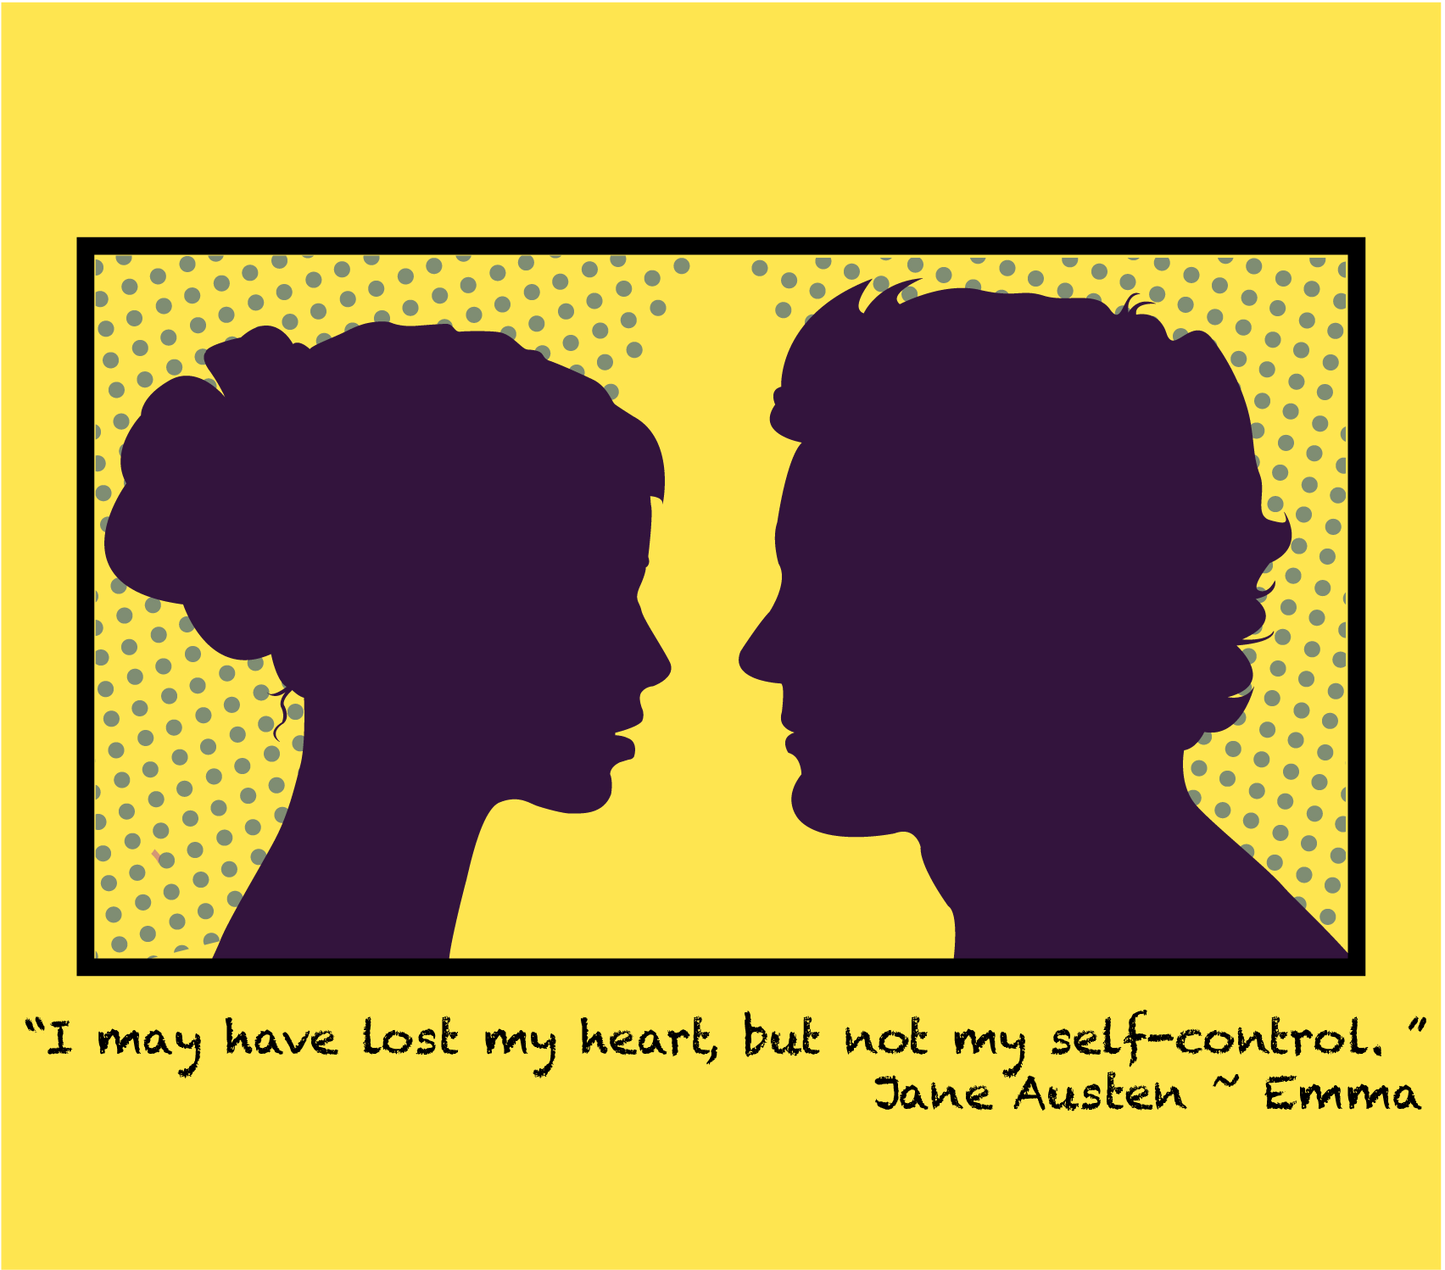 I may have lost my heart - Jane Austen, Emma